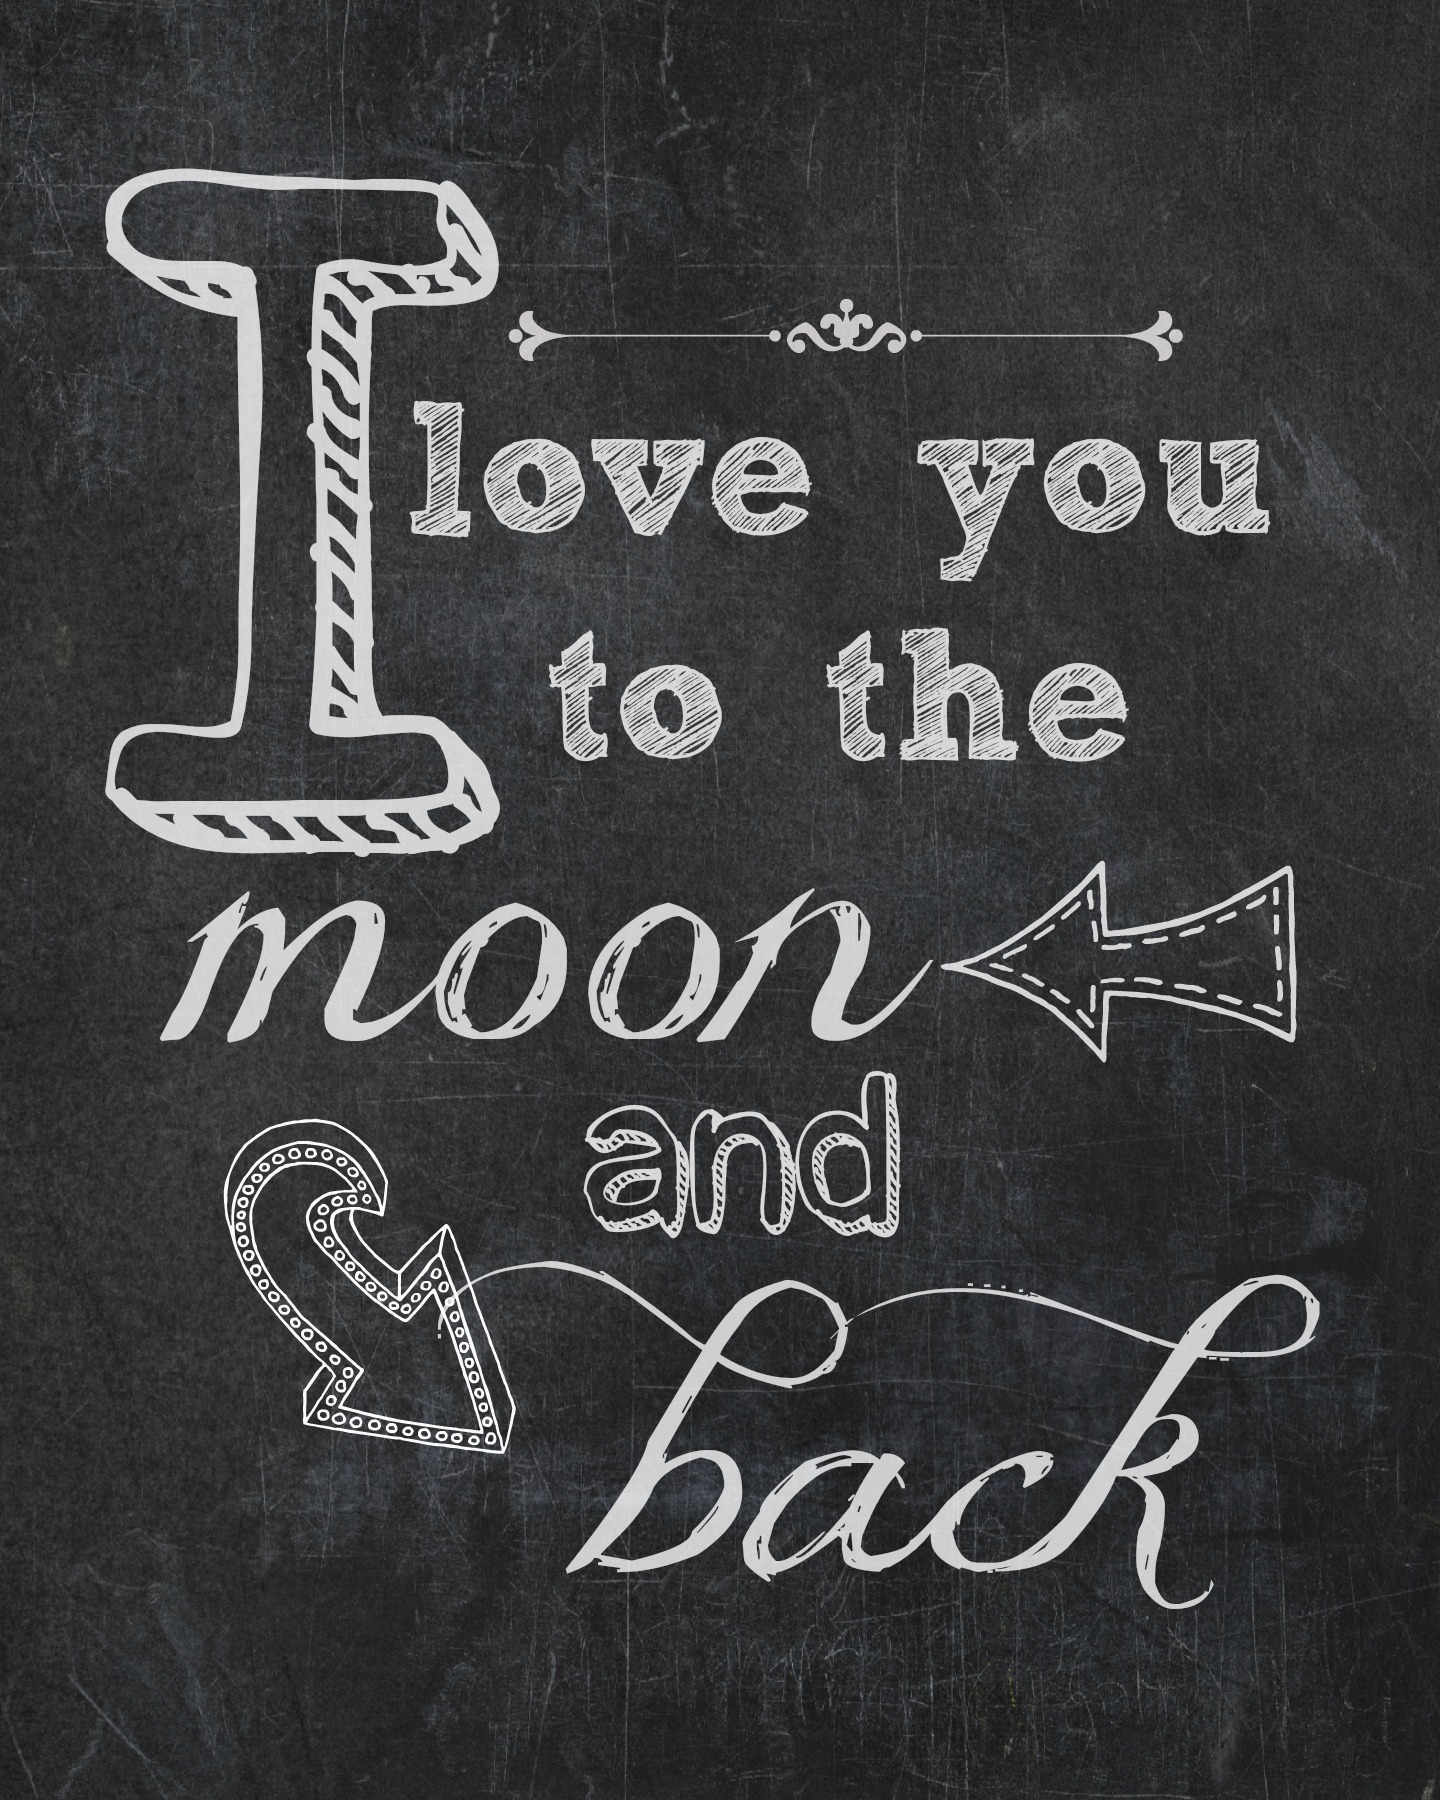 I Love You to the Moon  Back Free Printable  Endlessly Inspired